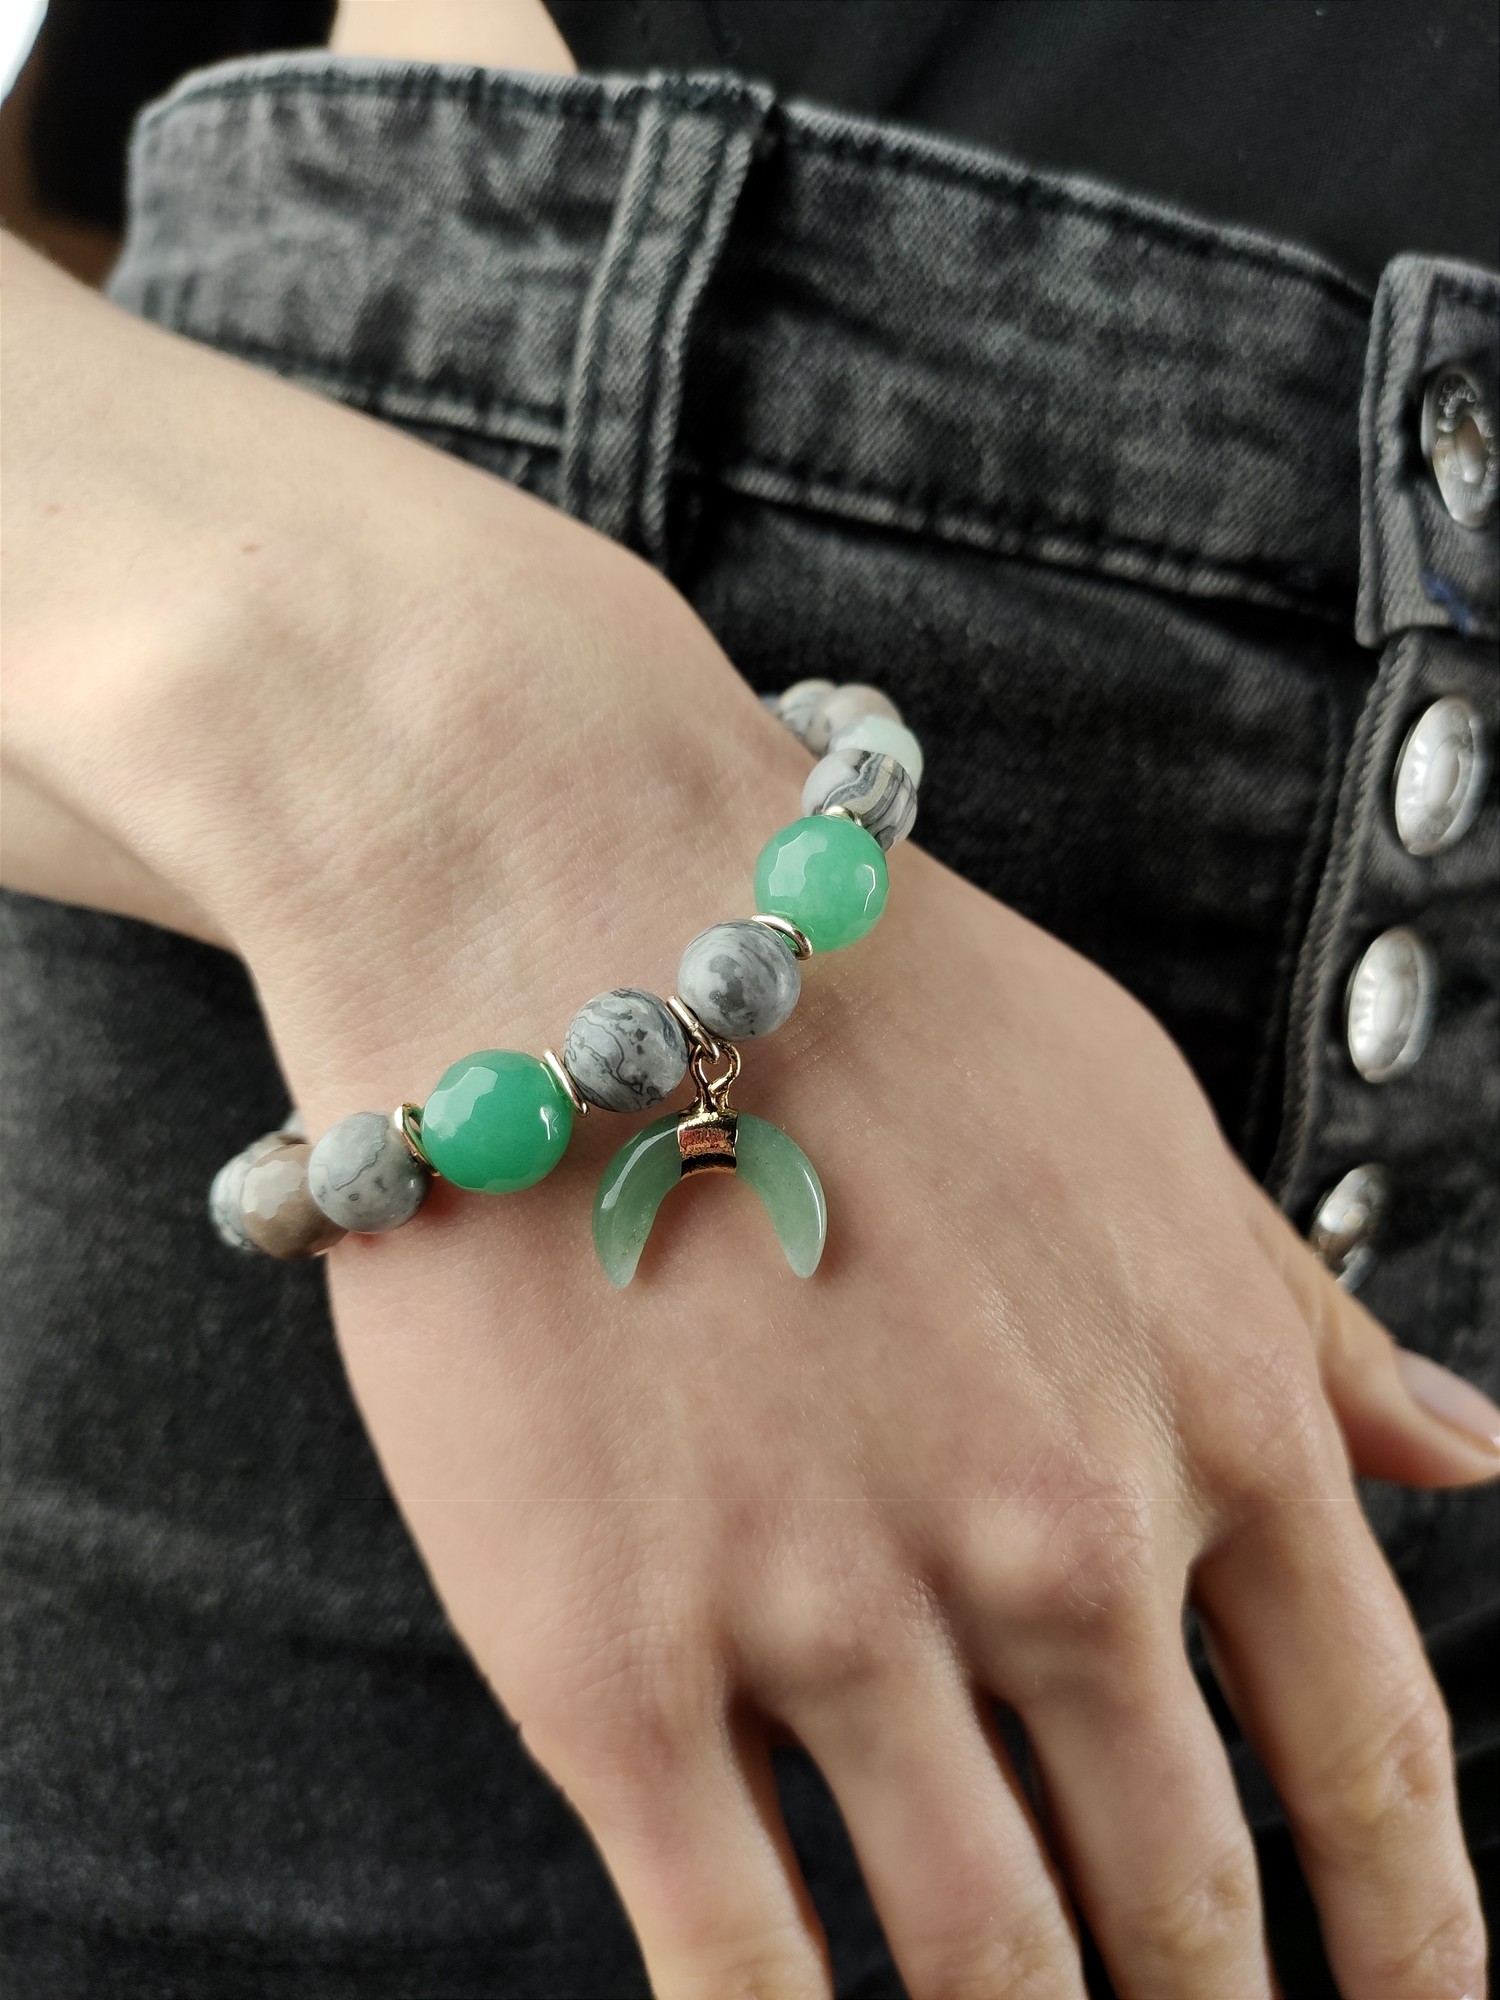 Bracelet with natural stones and pendant